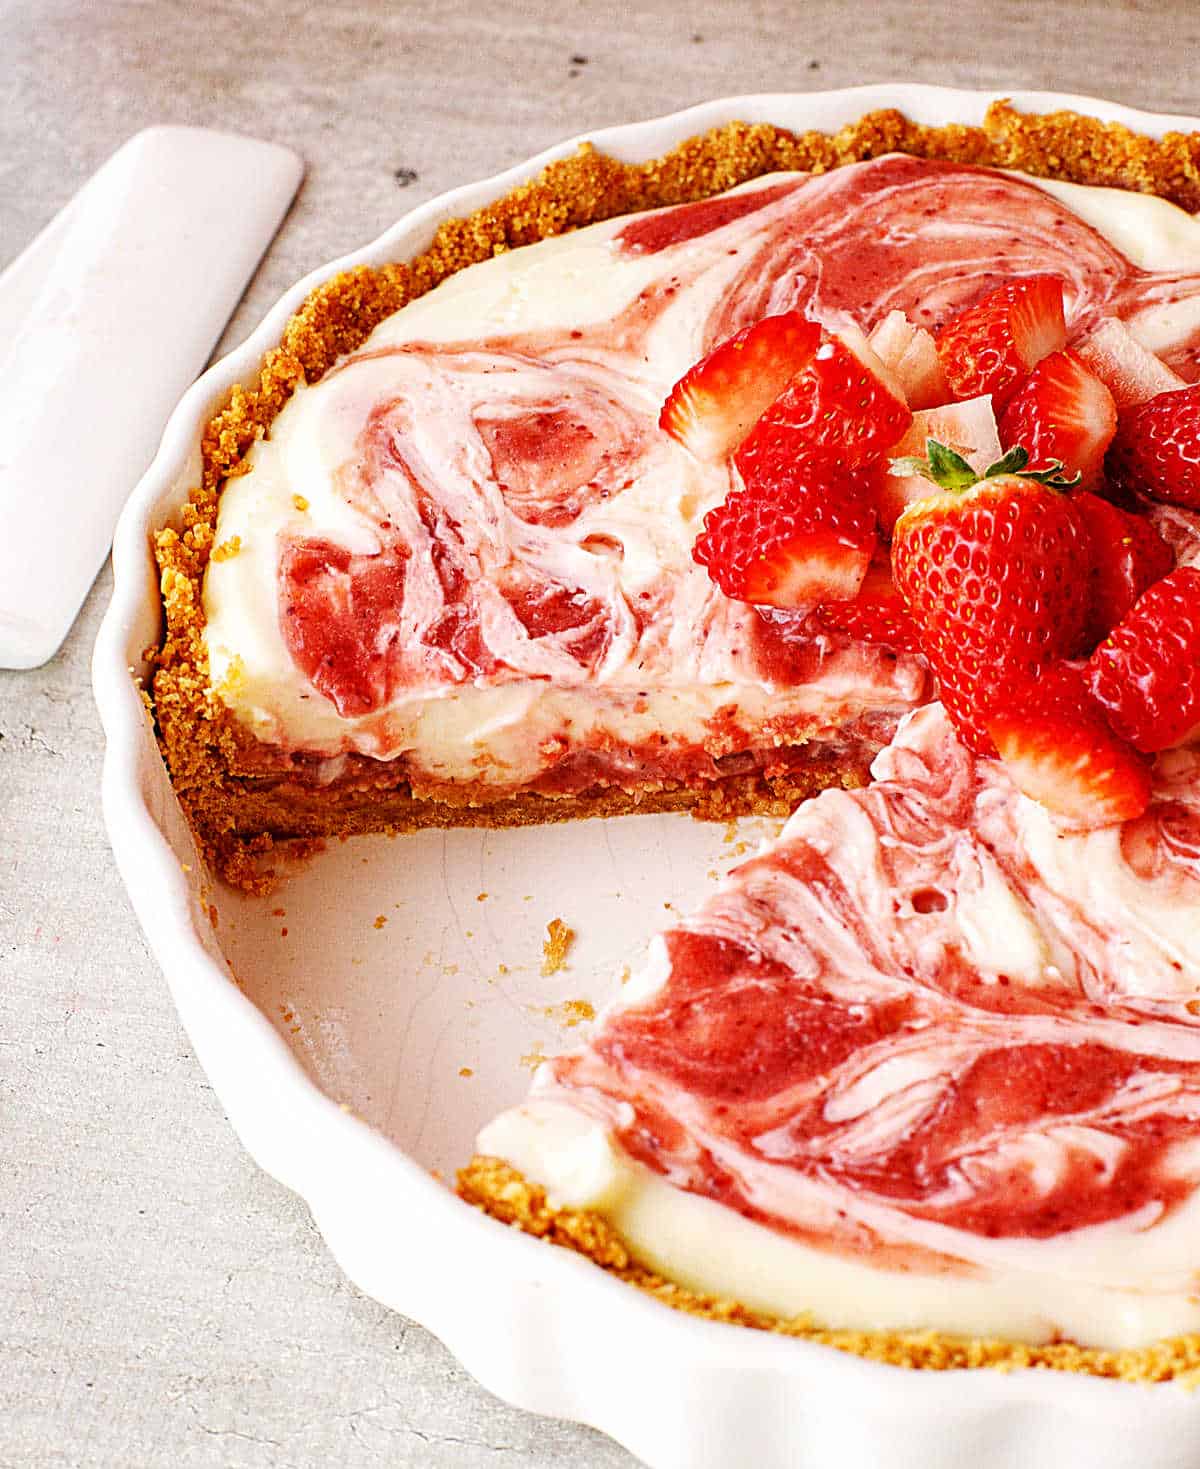 Strawberry pie missing a slice in white dish on grey surface, white cake server beside it. 